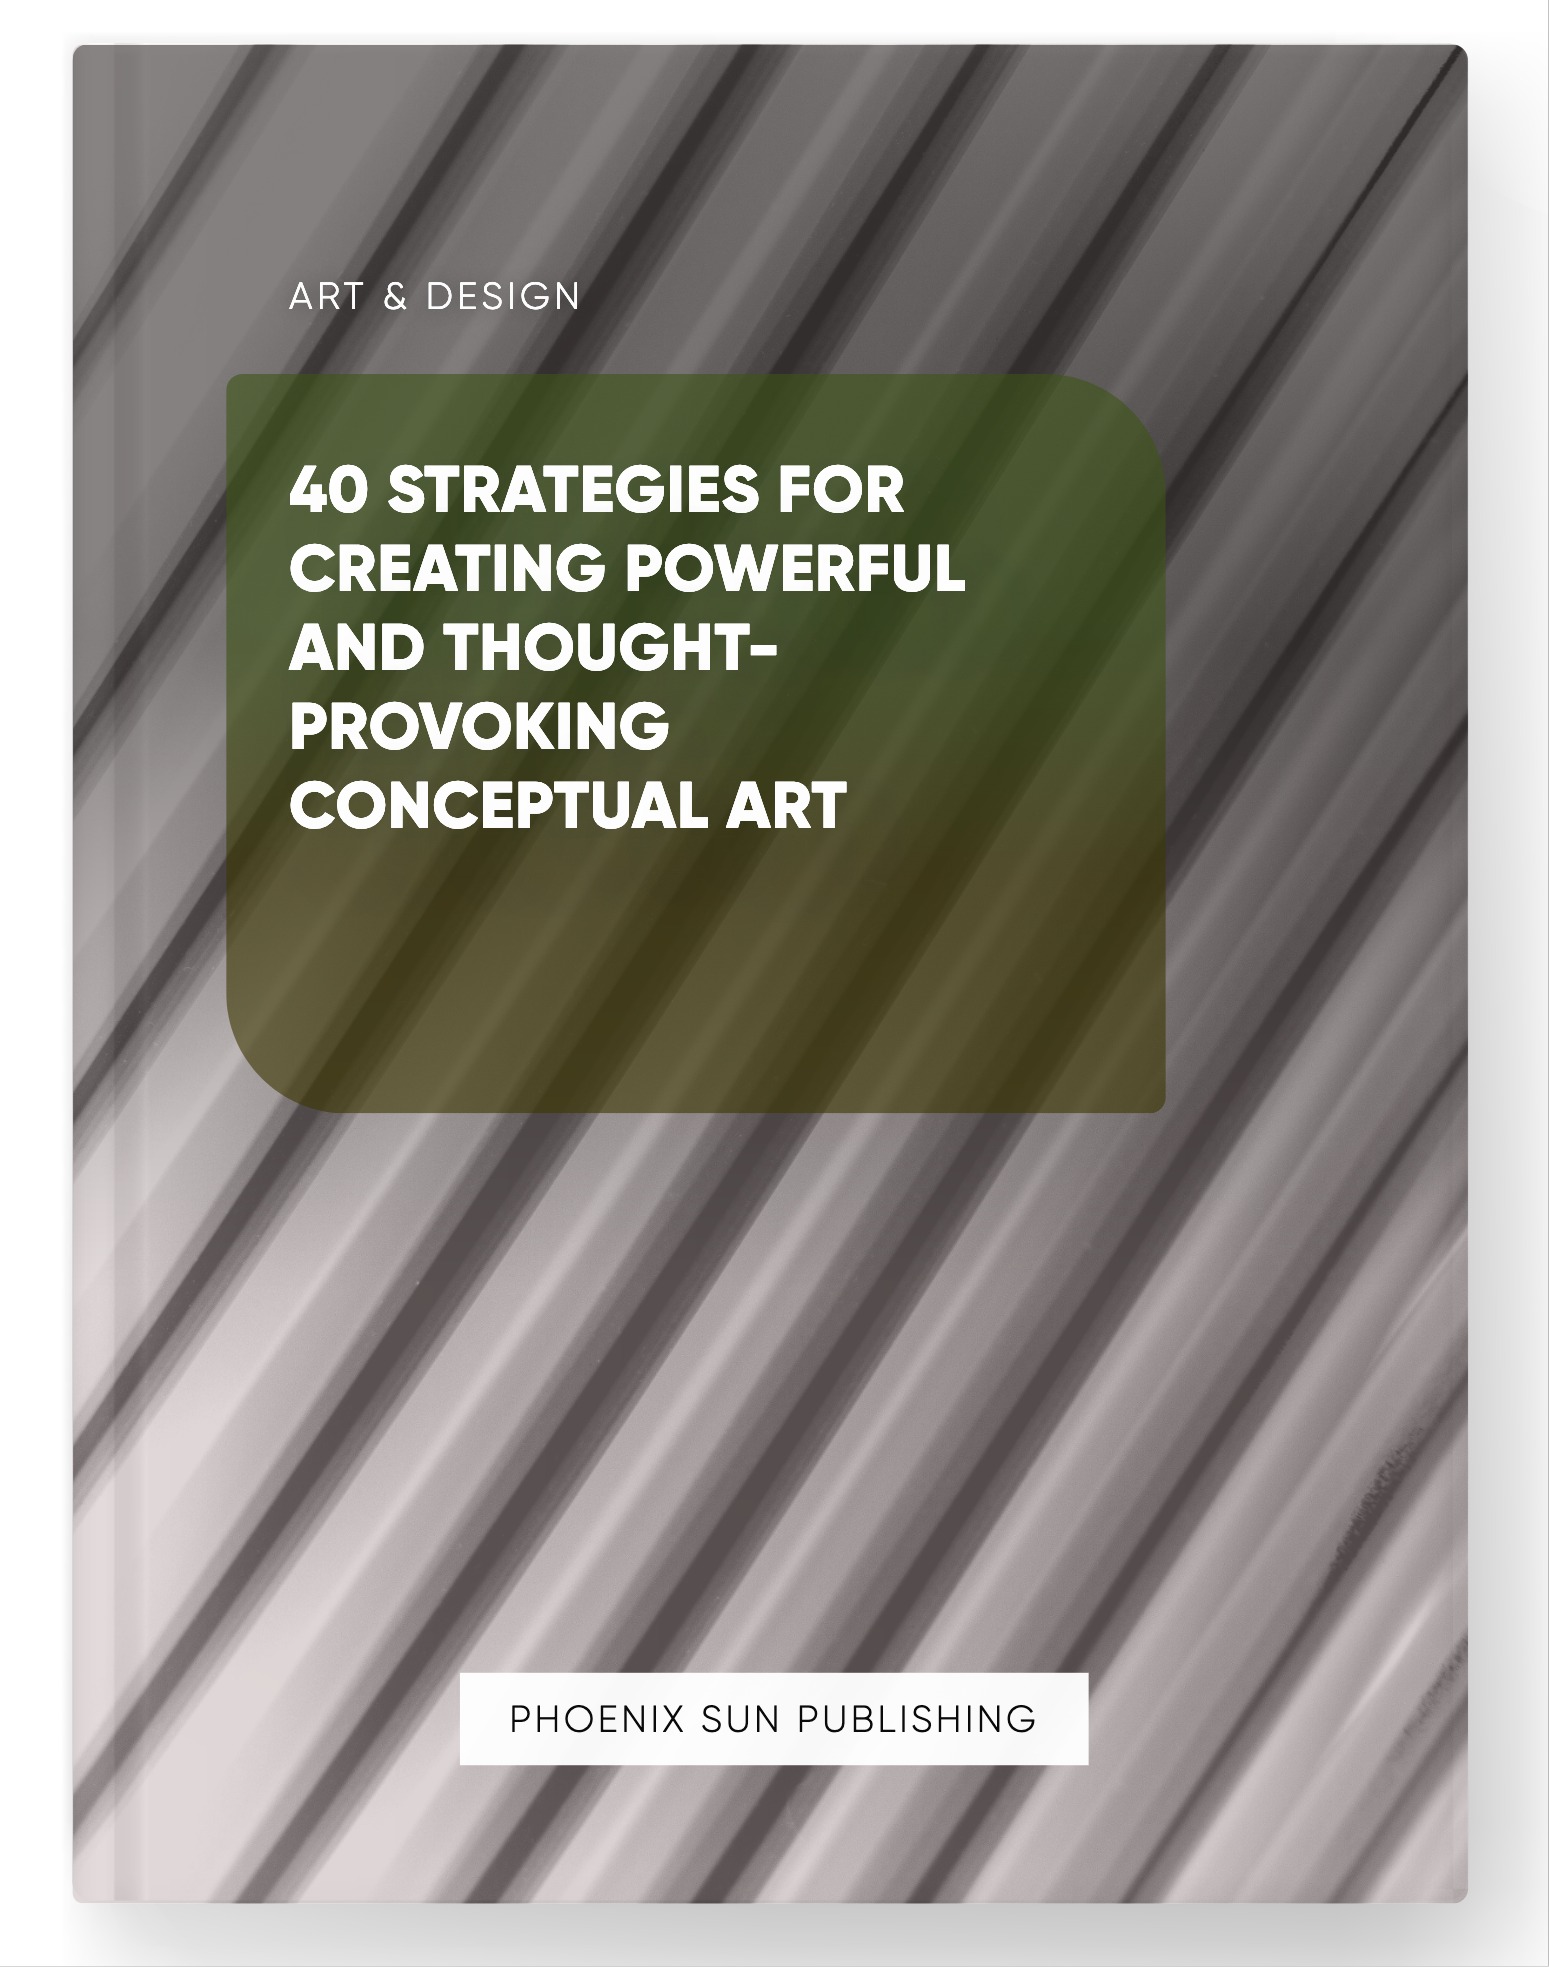 40 Strategies for Creating Powerful and Thought-Provoking Conceptual Art